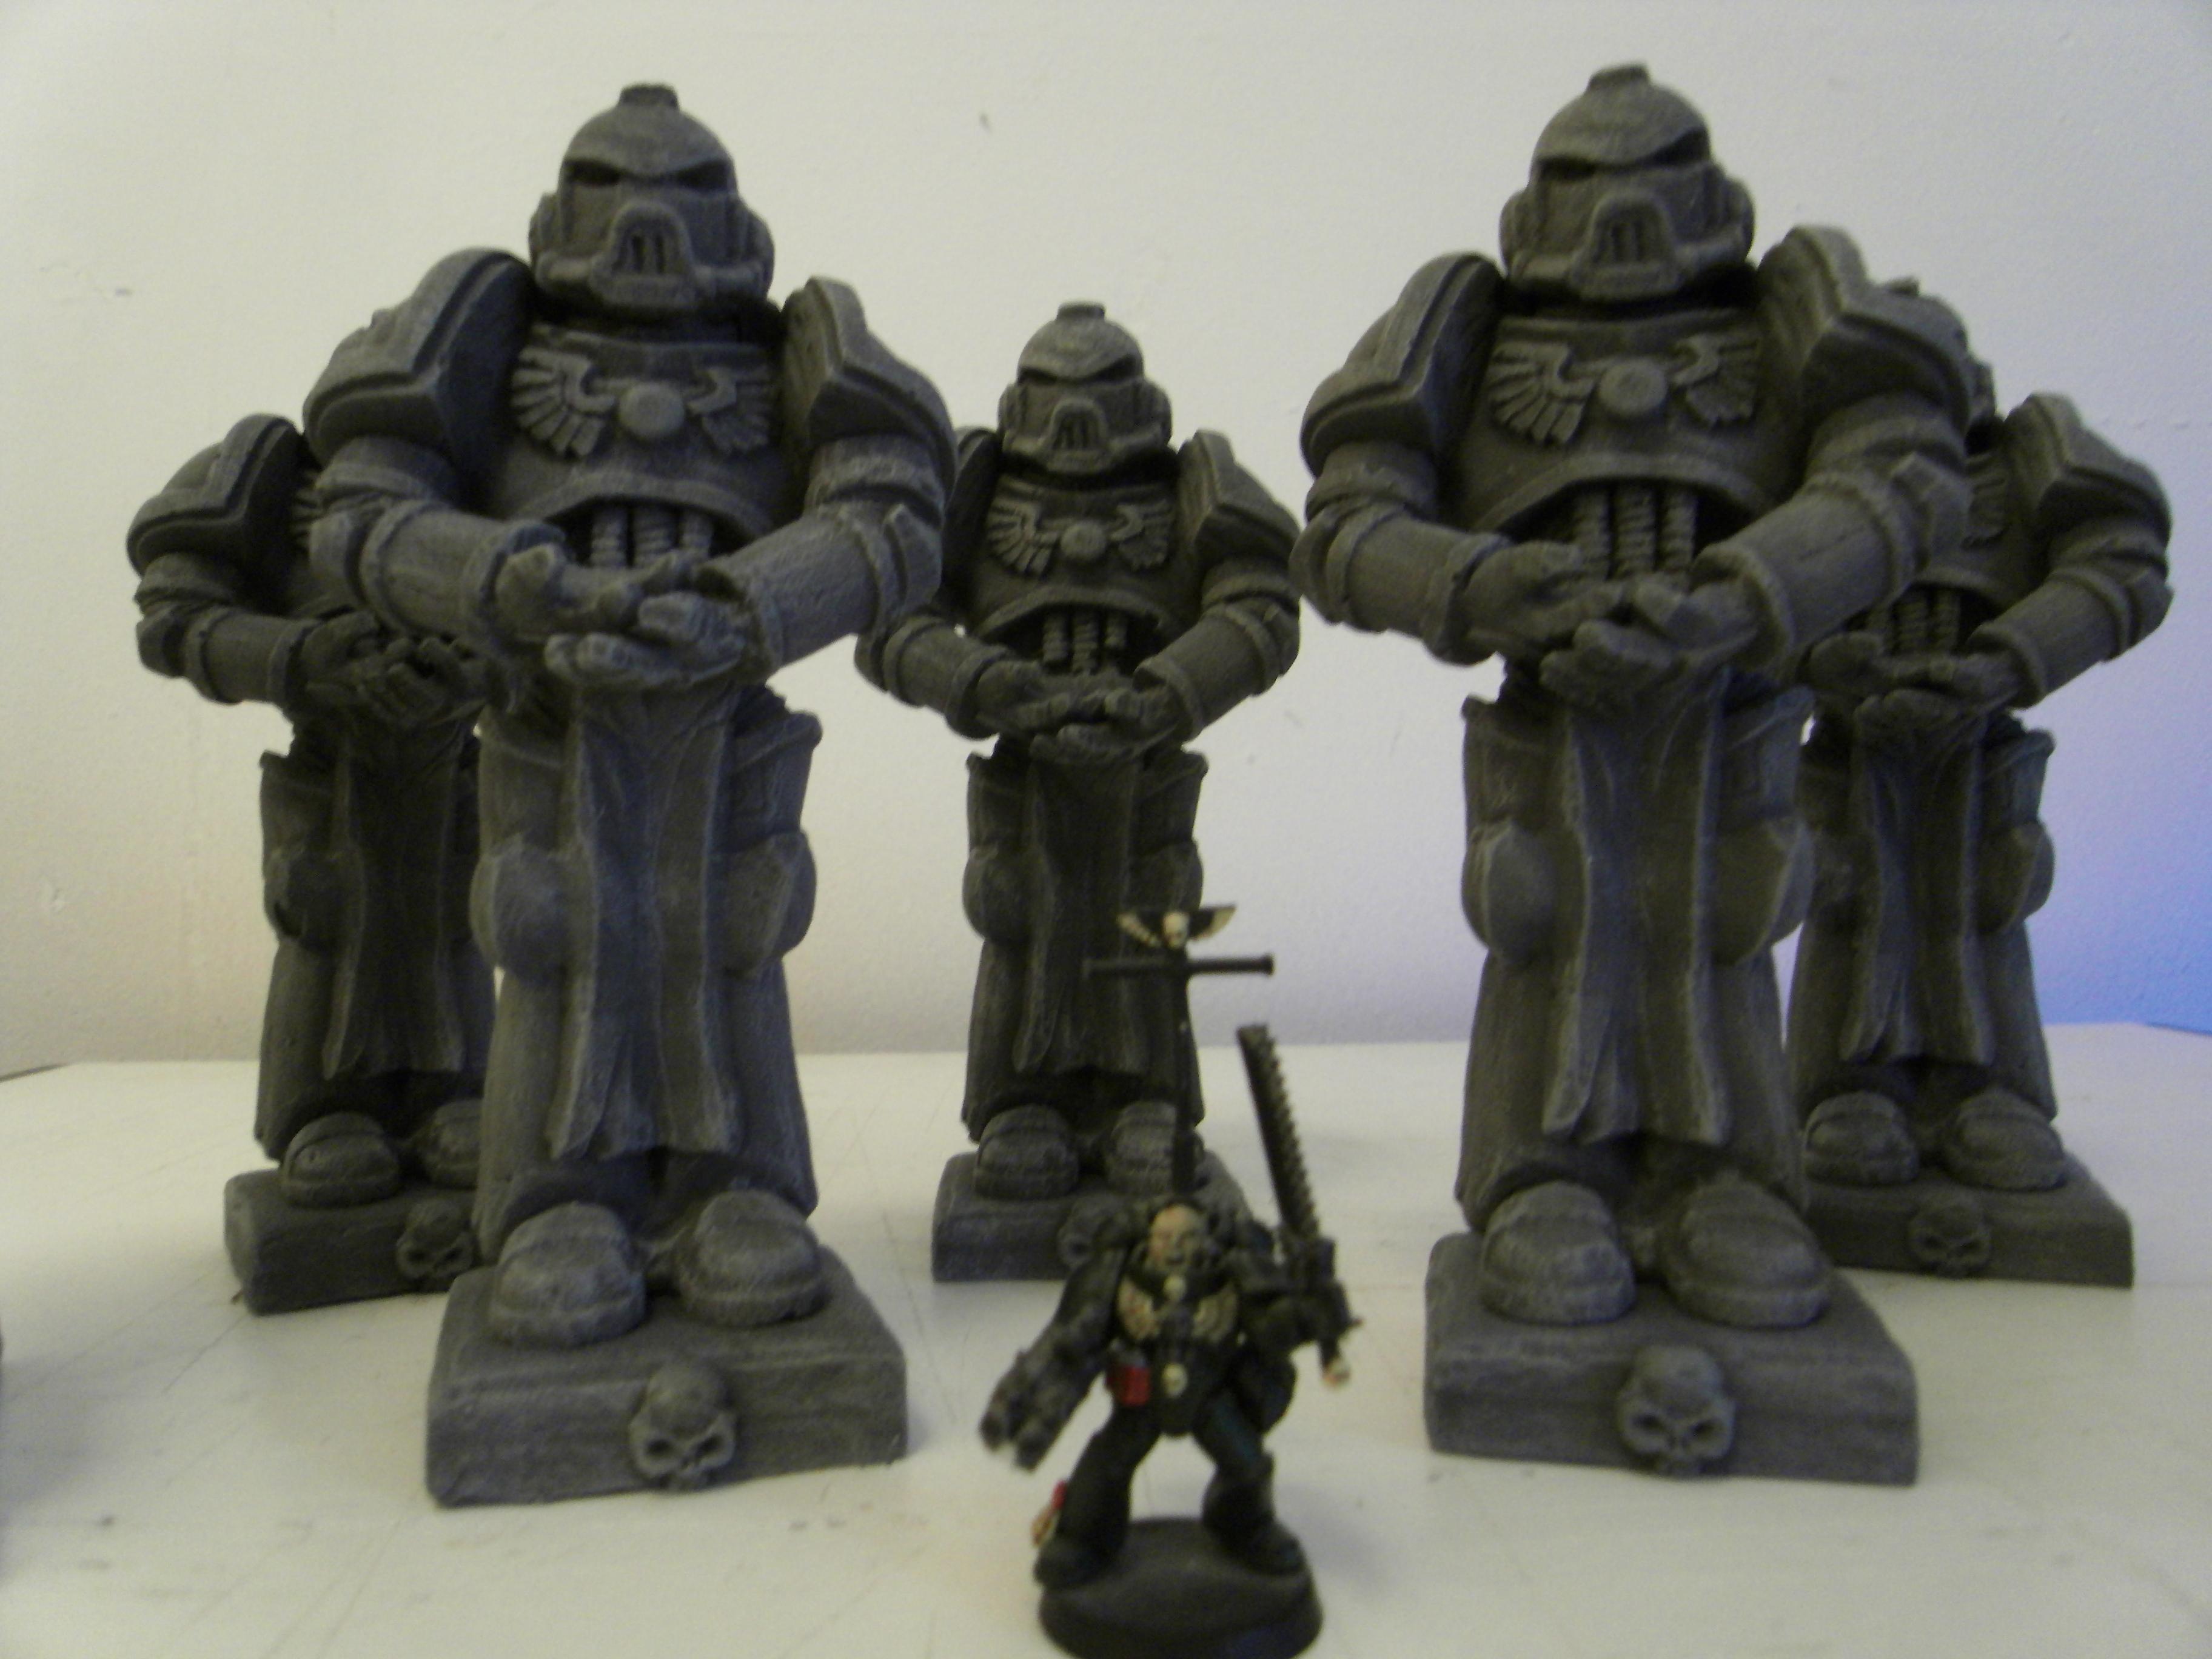 40k Inquisitor, 40k Scenery, 40k Terrain, Chaos, Chaos Lord, Chaos Space Marines, Imperial, Imperium, Inquisition, Inquisitor, Inquisitor Lord, Lord Inquisitor, Monument, Scatch Build, Scratch Build, Sculpting, Sculpture, Space Marines, Statue, Statues, Terrain, Warhammer 40,000, Warhammer Fantasy, Work In Progress